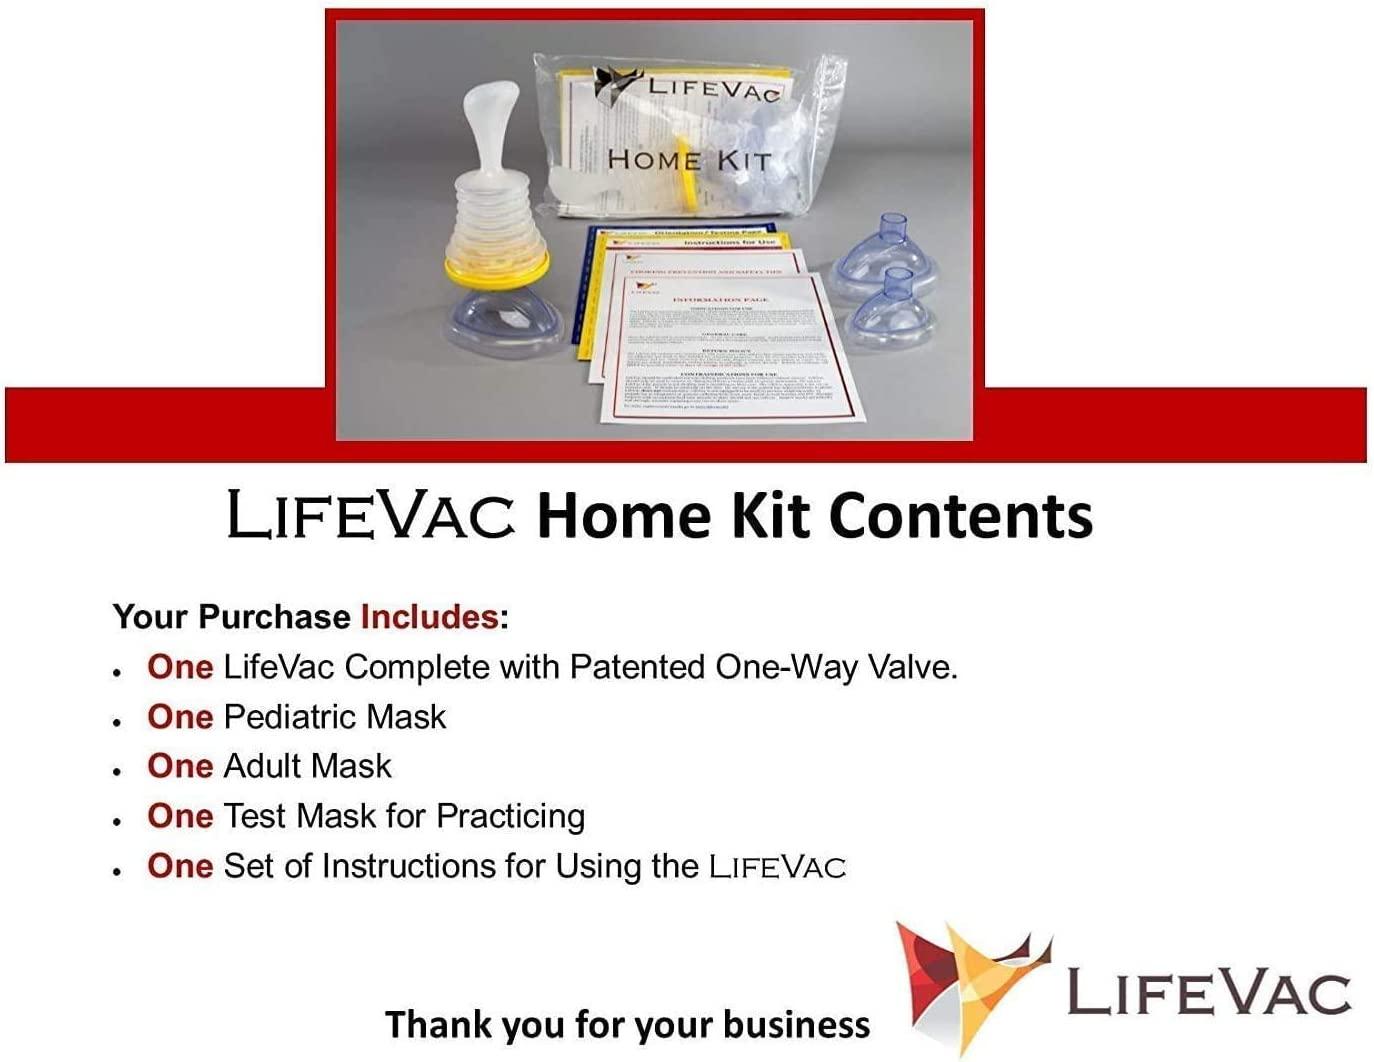 How To Save Lives With The LifeVac Choking Rescue Device